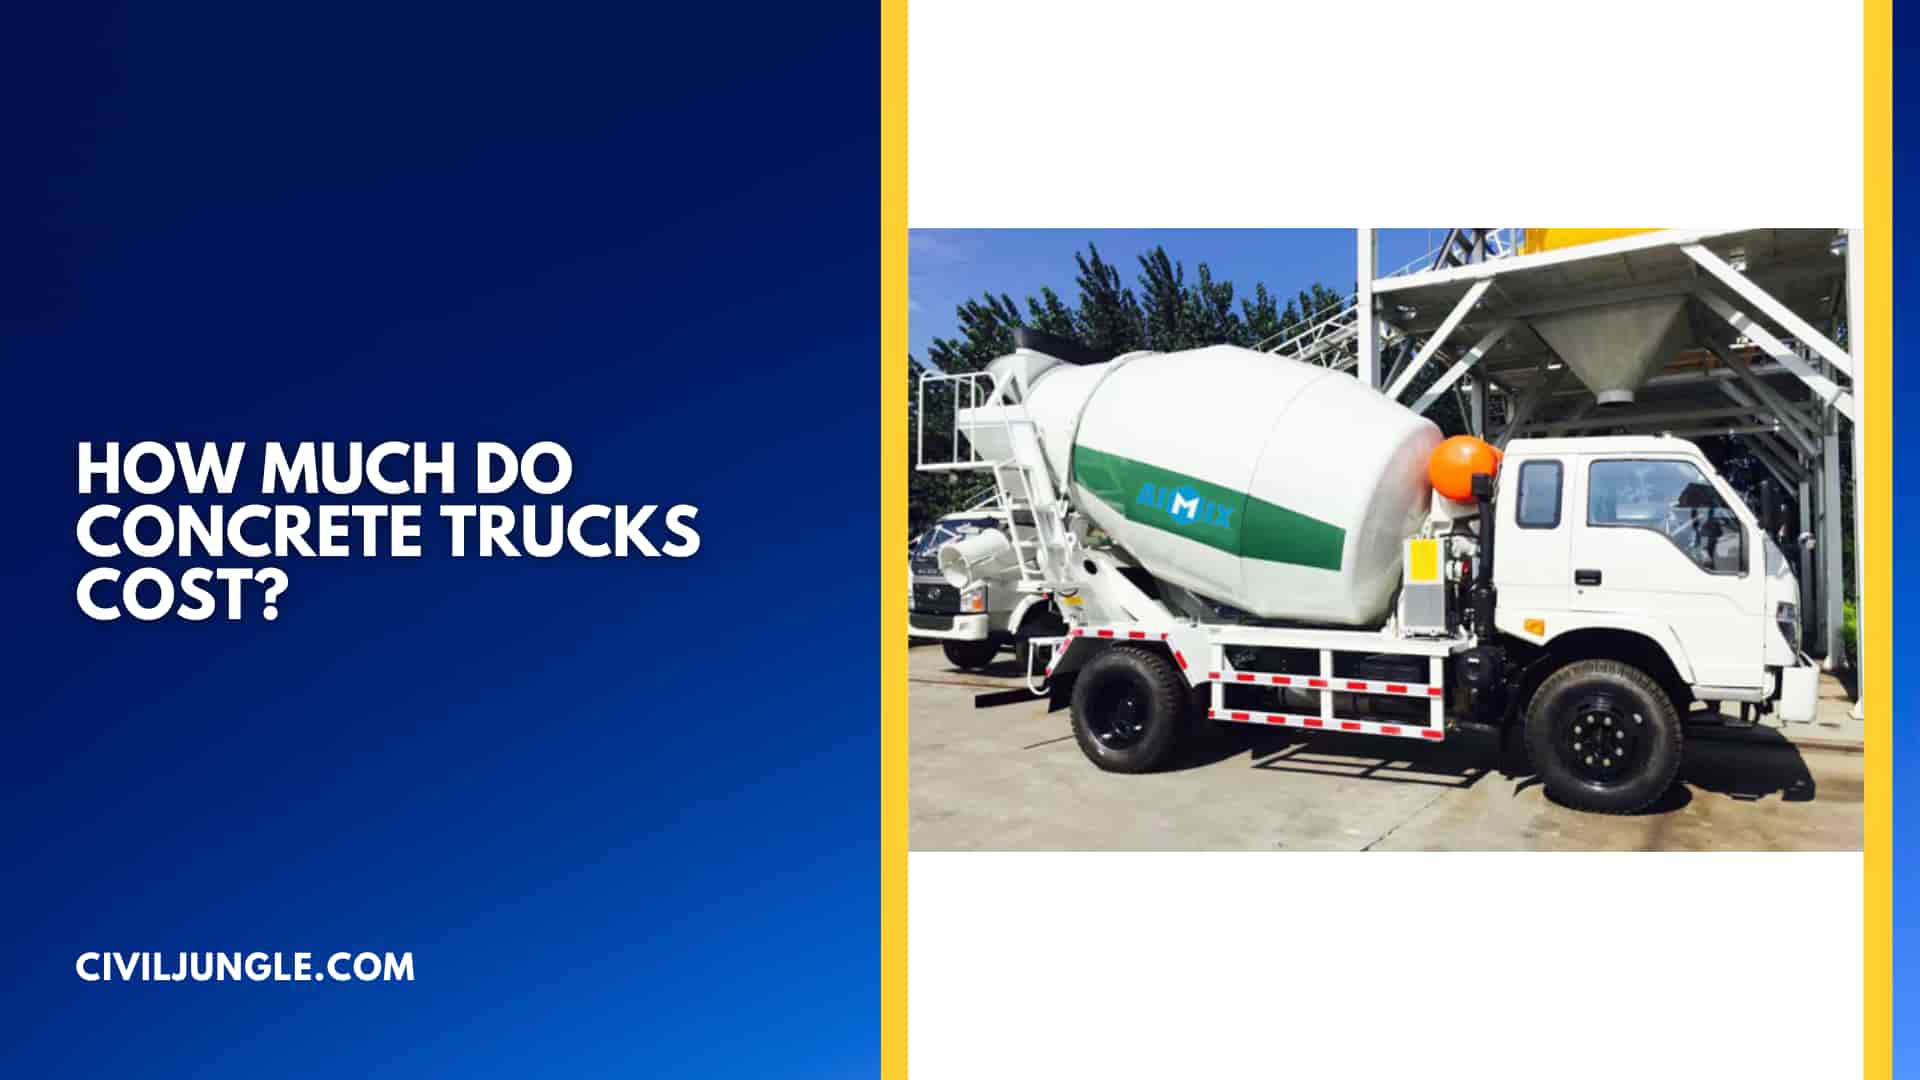 How Much Do Concrete Trucks Cost?